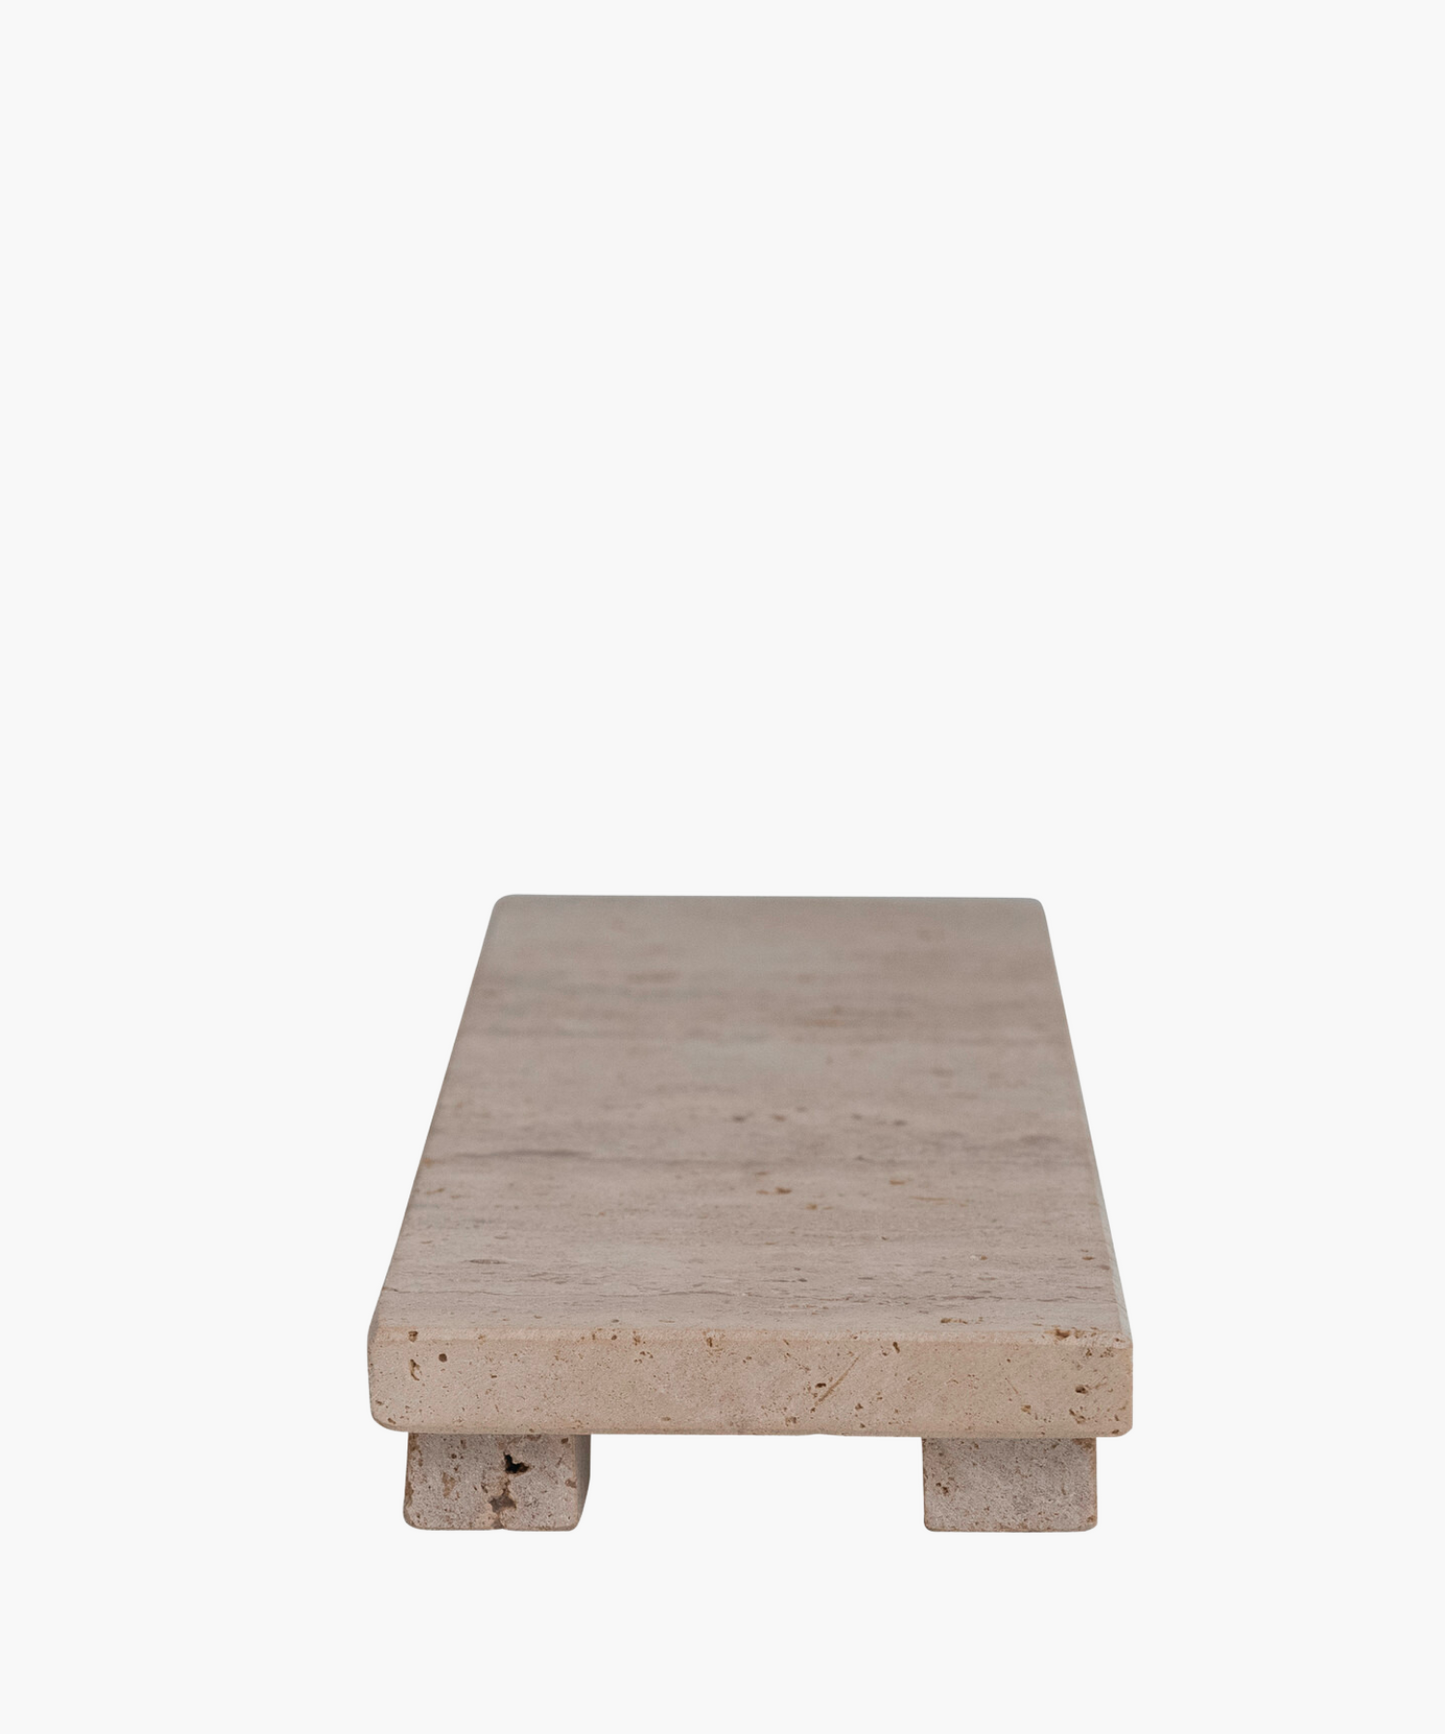 Travertine Footed Tray